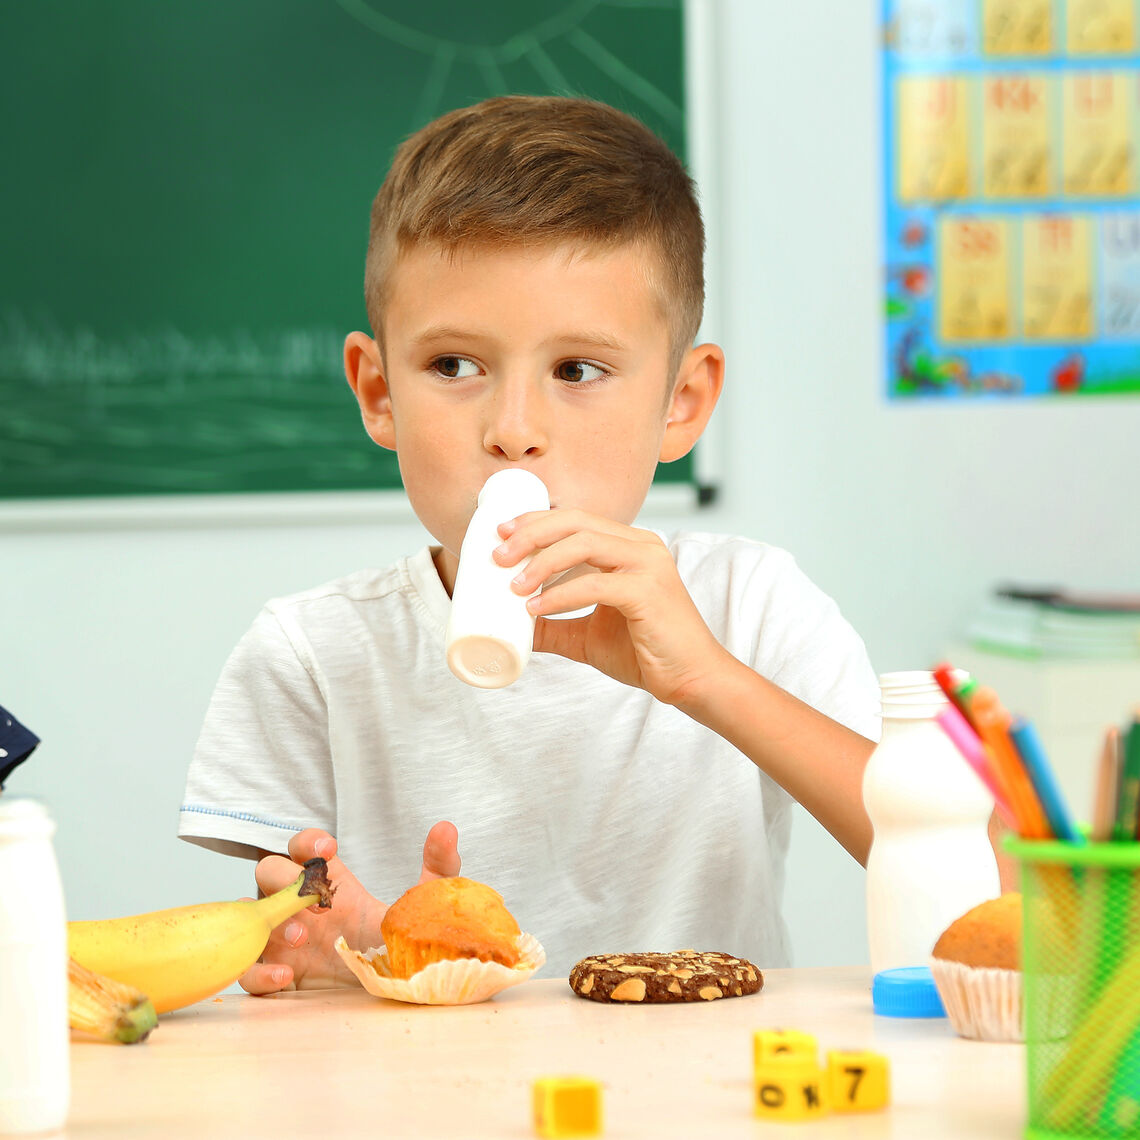 a boy sips milk with a muffin at his desk in the classroom